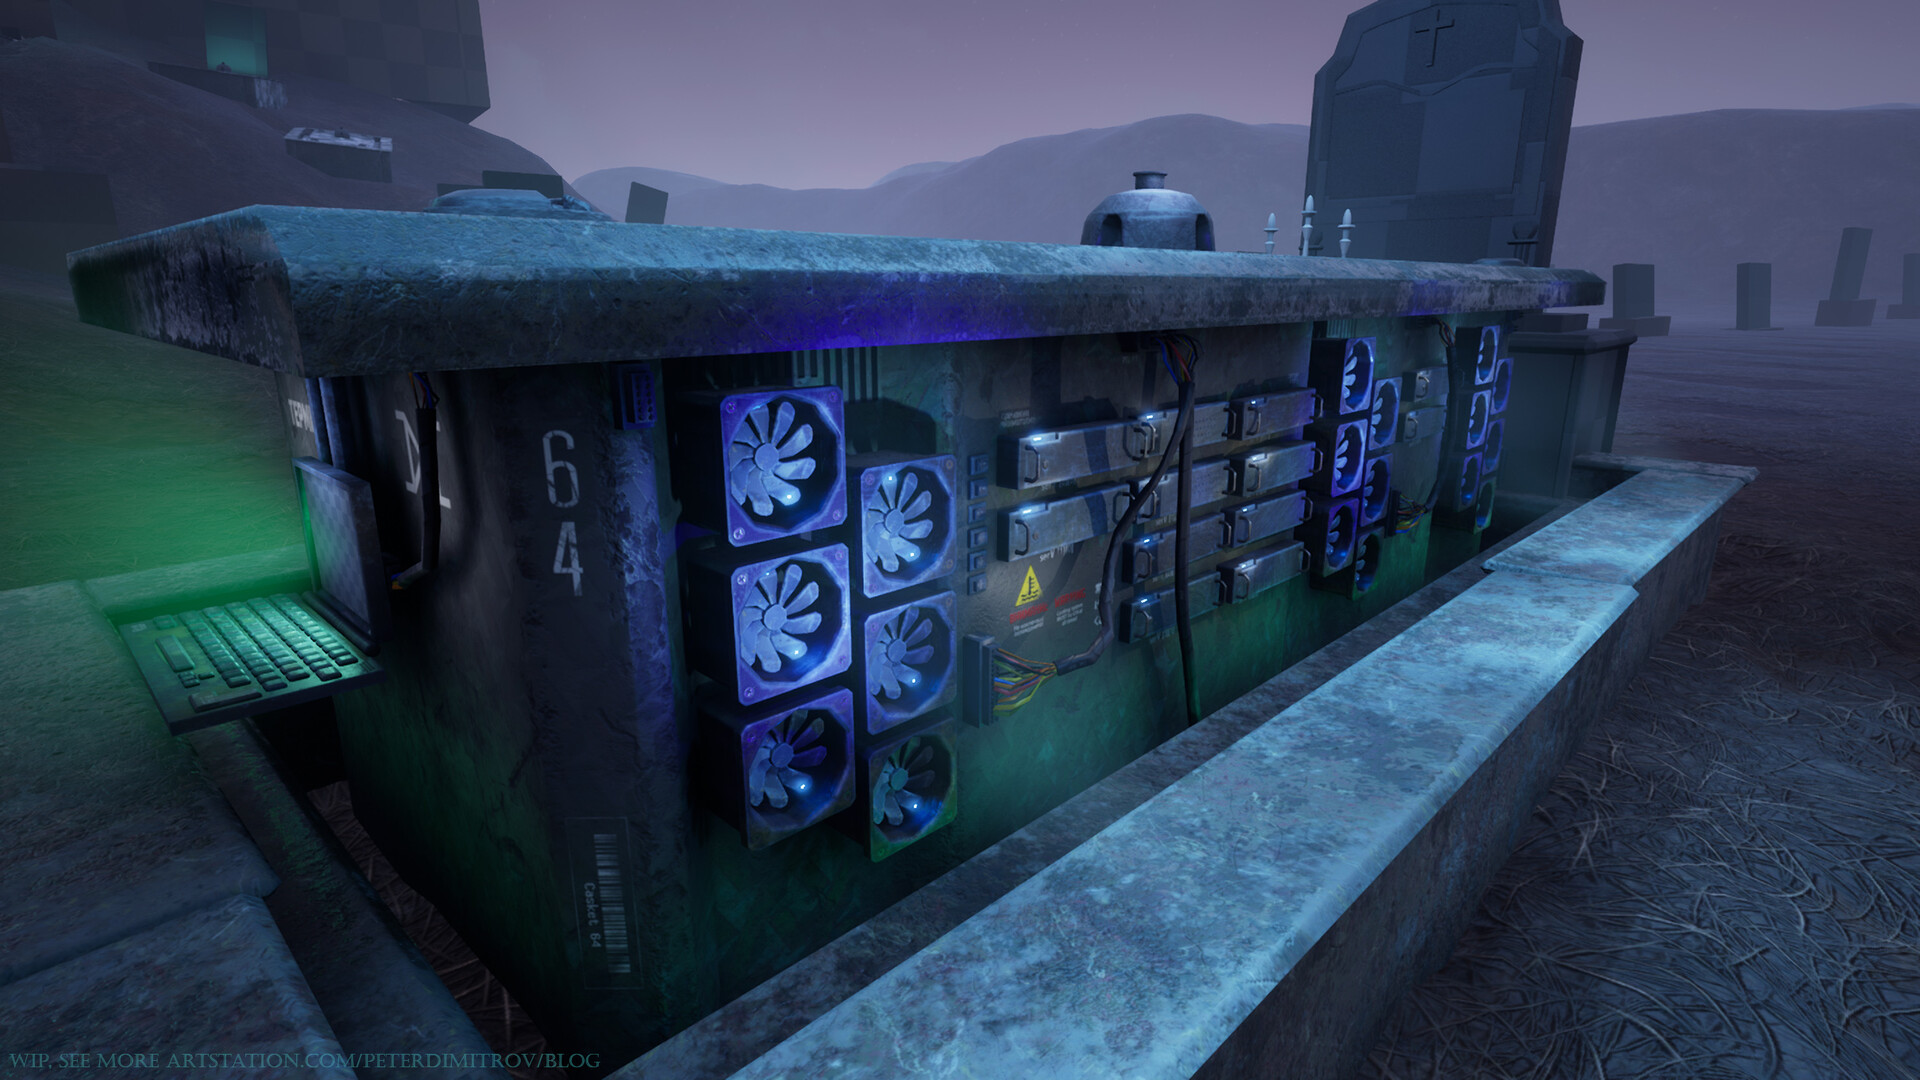 The cyberpunk casket, seen from an angle. Showcases mainly the ventilators and the server racks with their blue and green lights.